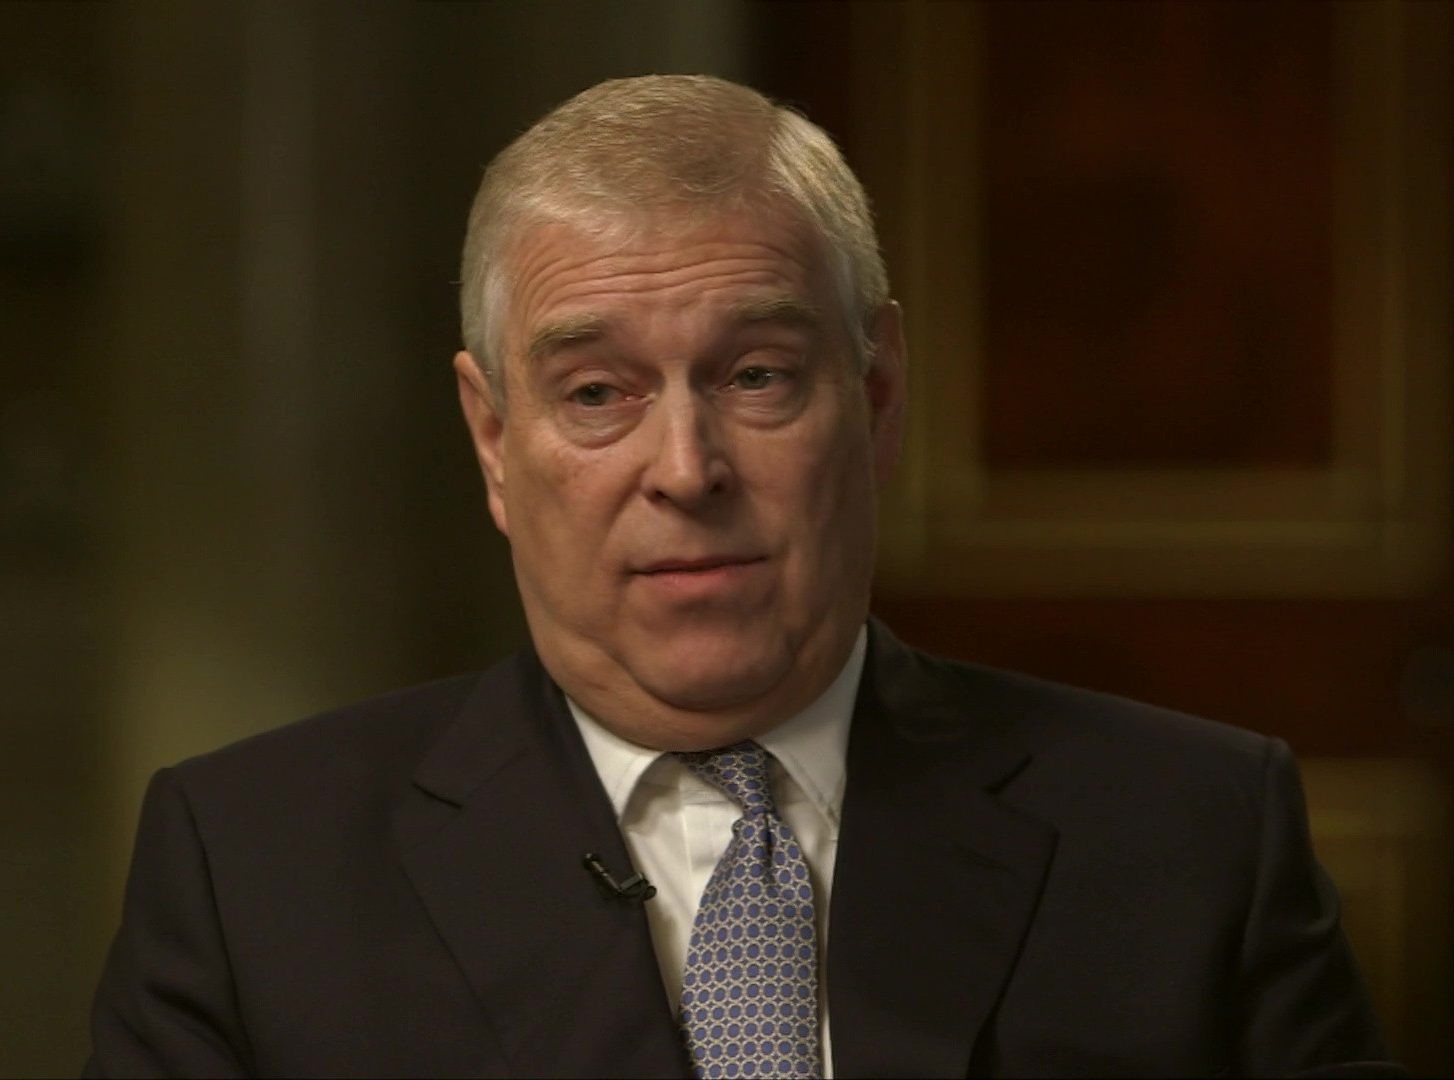 Prince Andrew has denied he had any kind of sexual relationship with Virginia Roberts